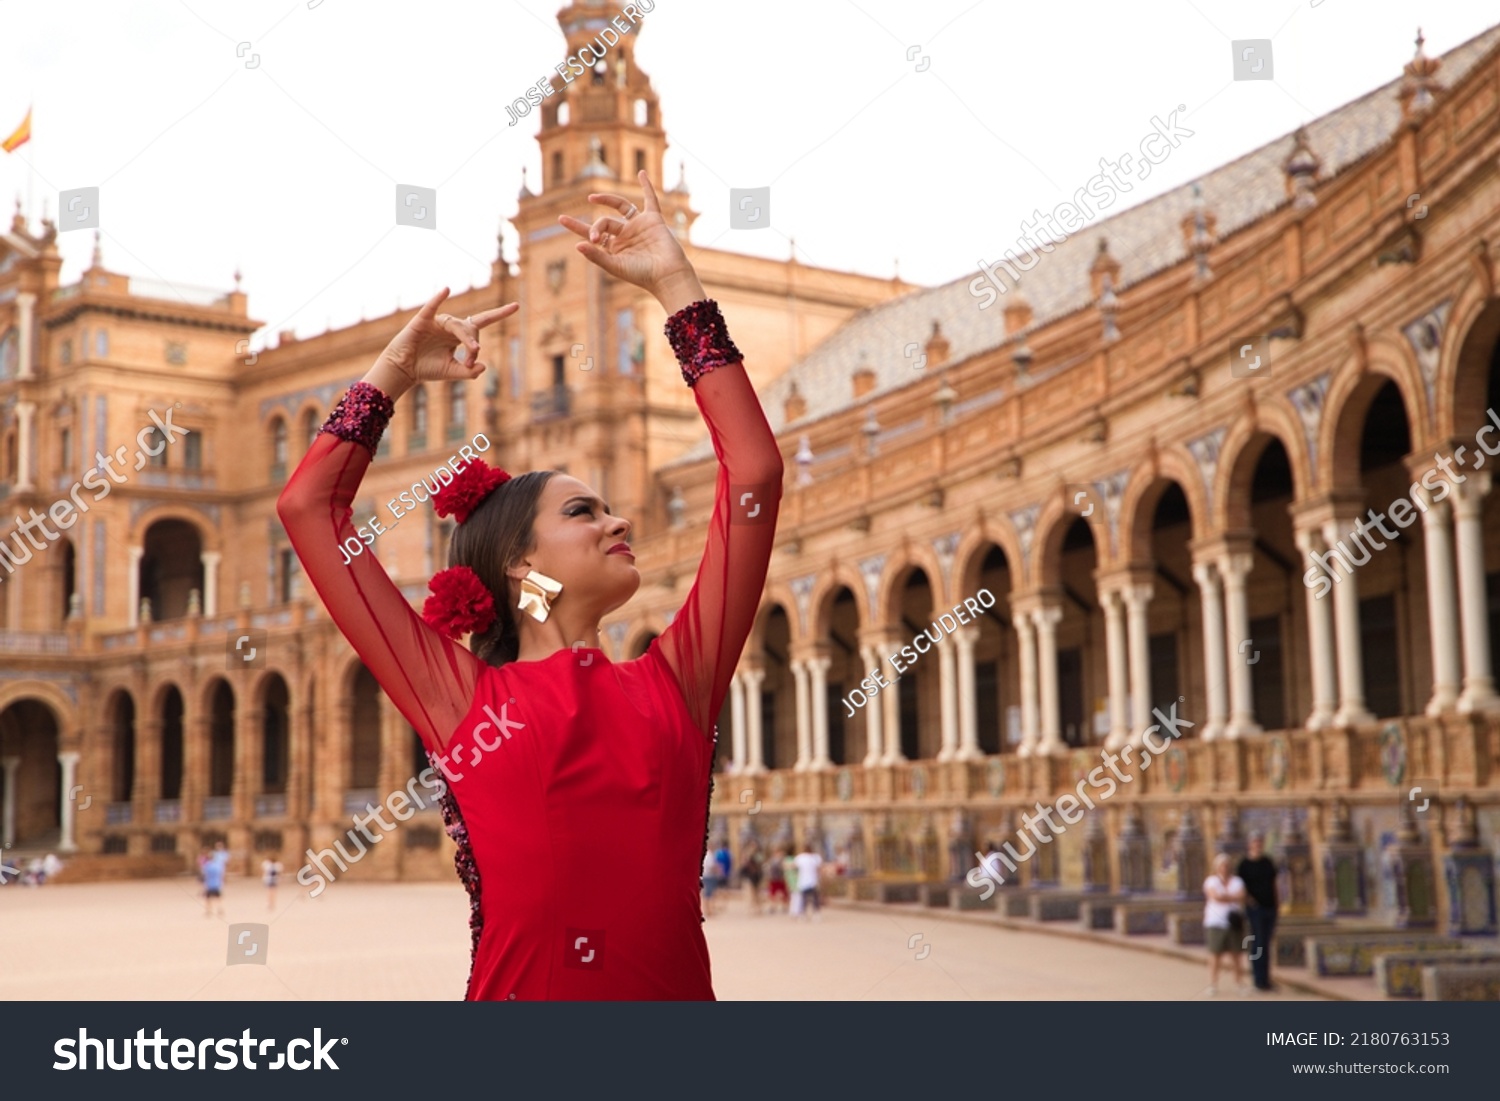 Beautiful teenage woman dancing flamenco in a square in Seville, Spain. She wears a red dress with ruffles and dances flamenco with a lot of art. Flamenco cultural heritage of humanity. #2180763153